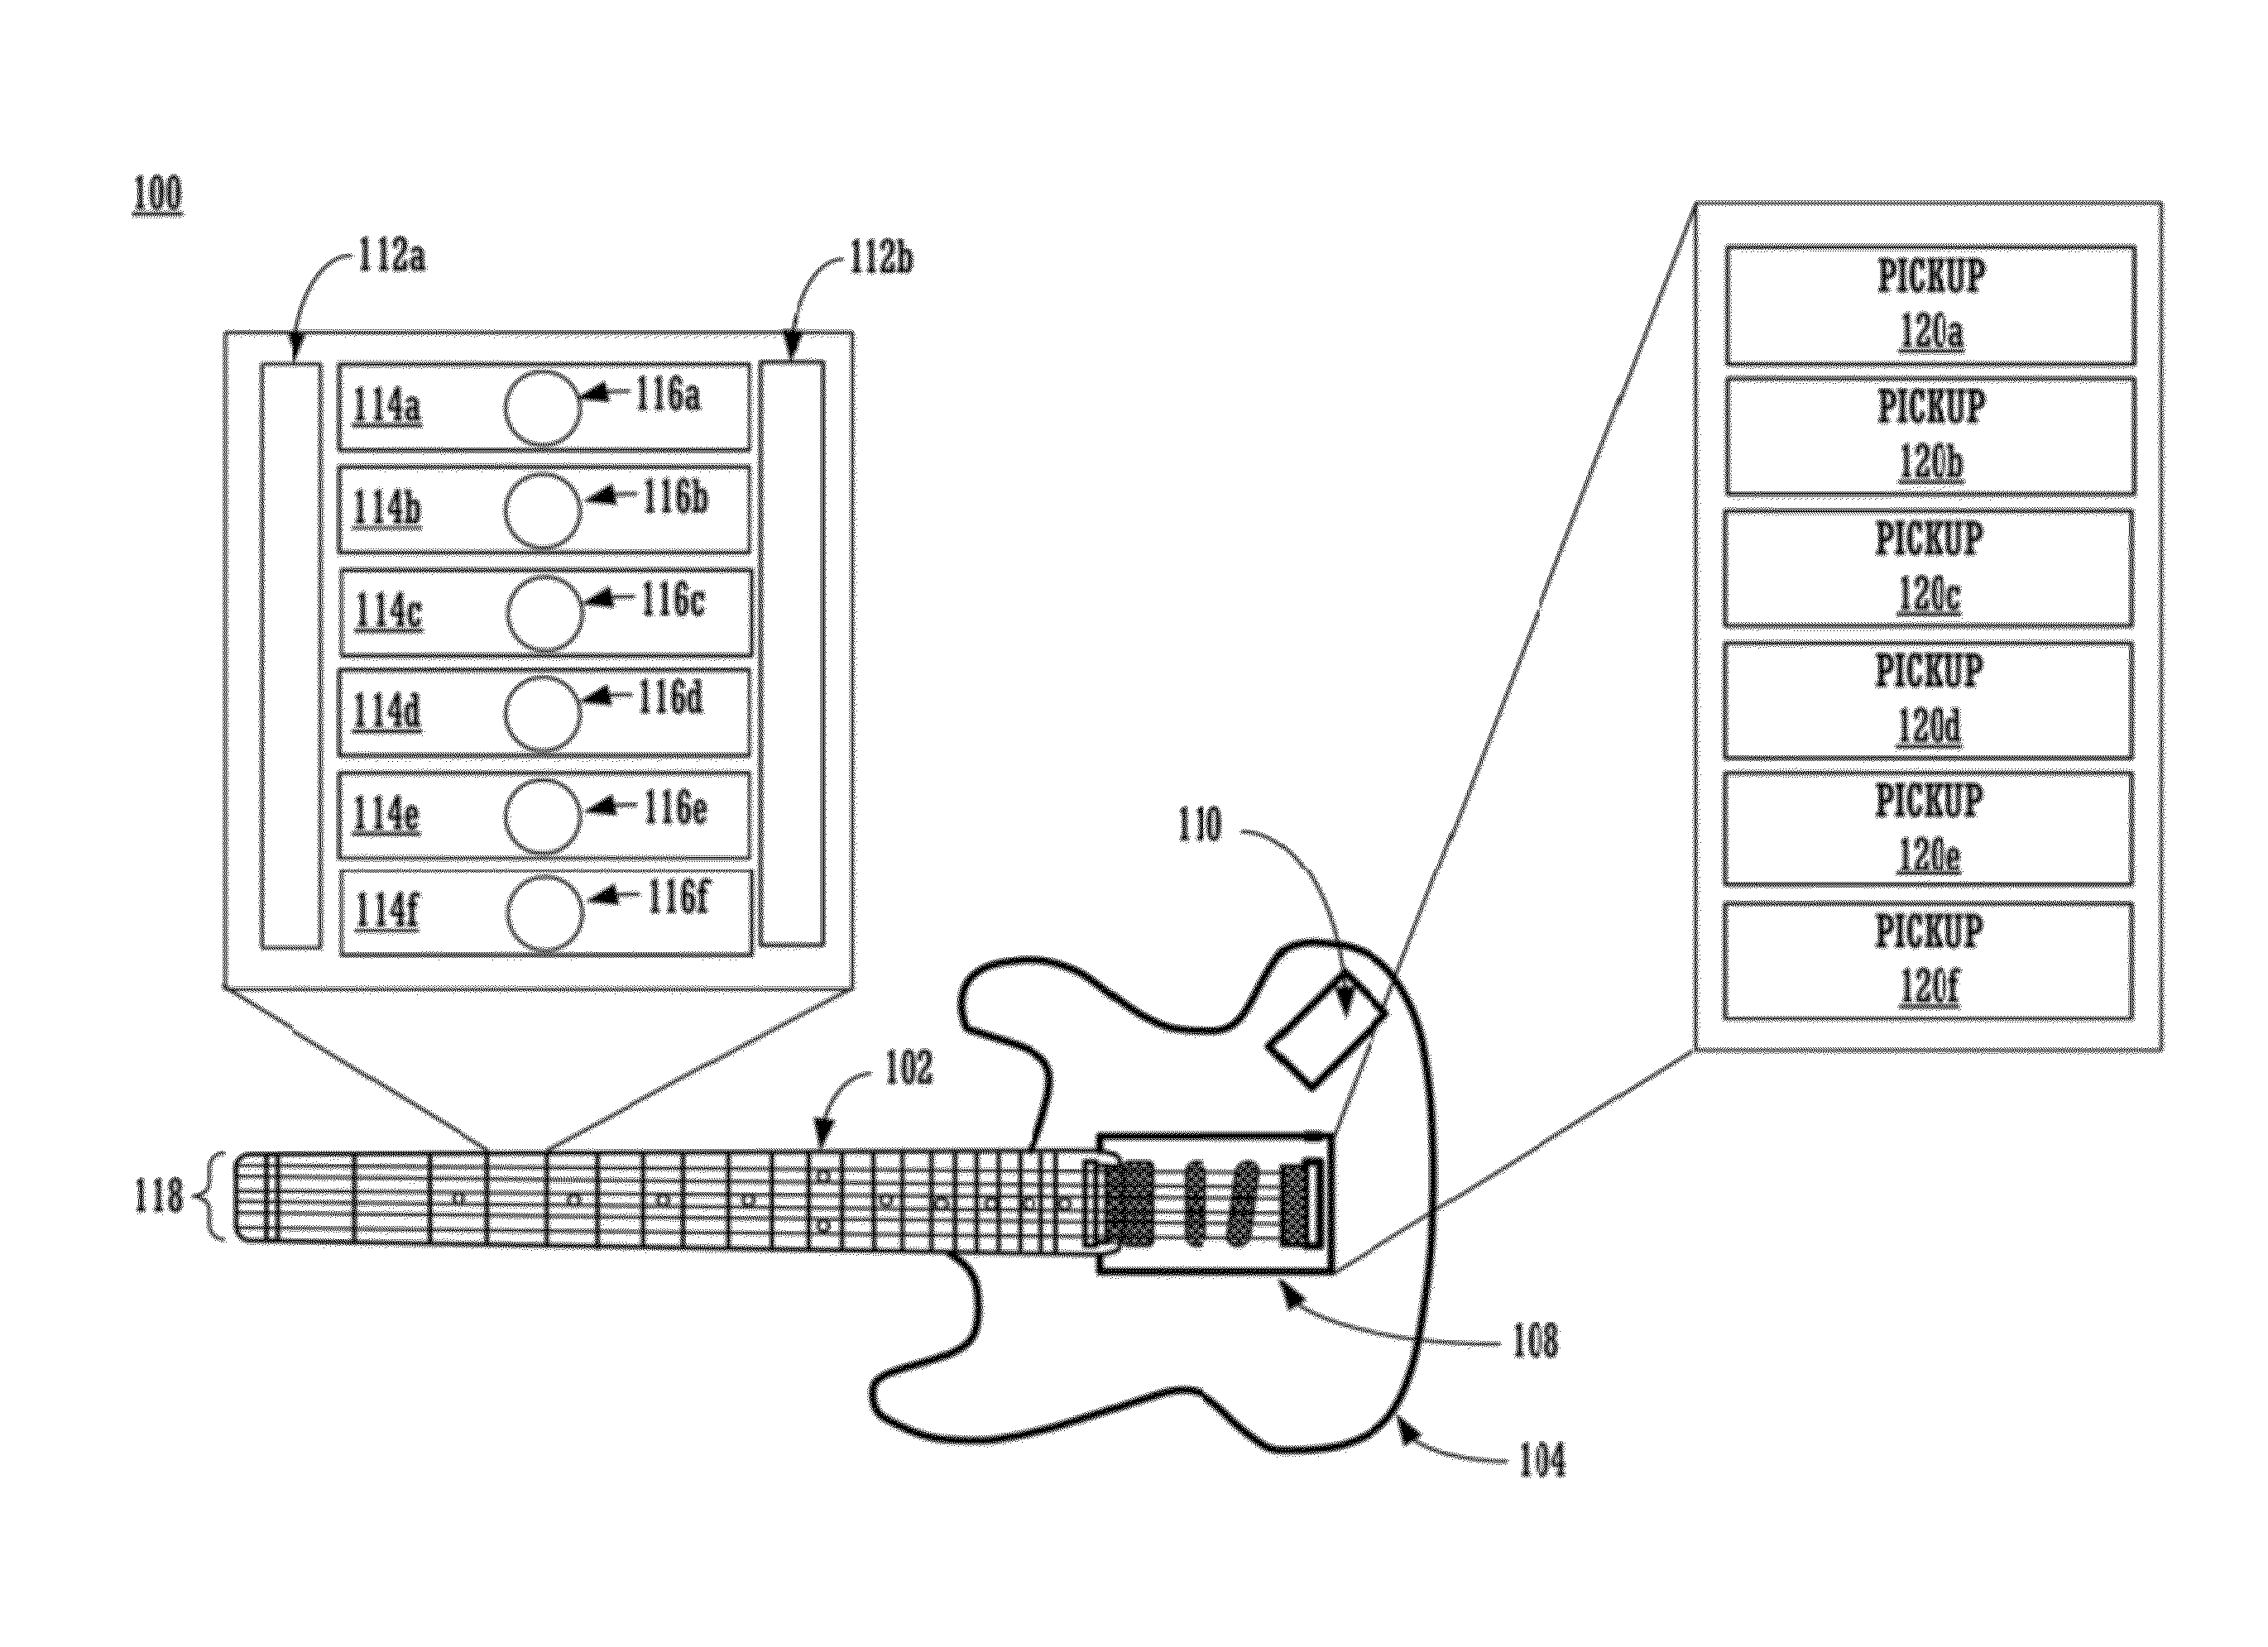 Methods and systems to process input of stringed instruments